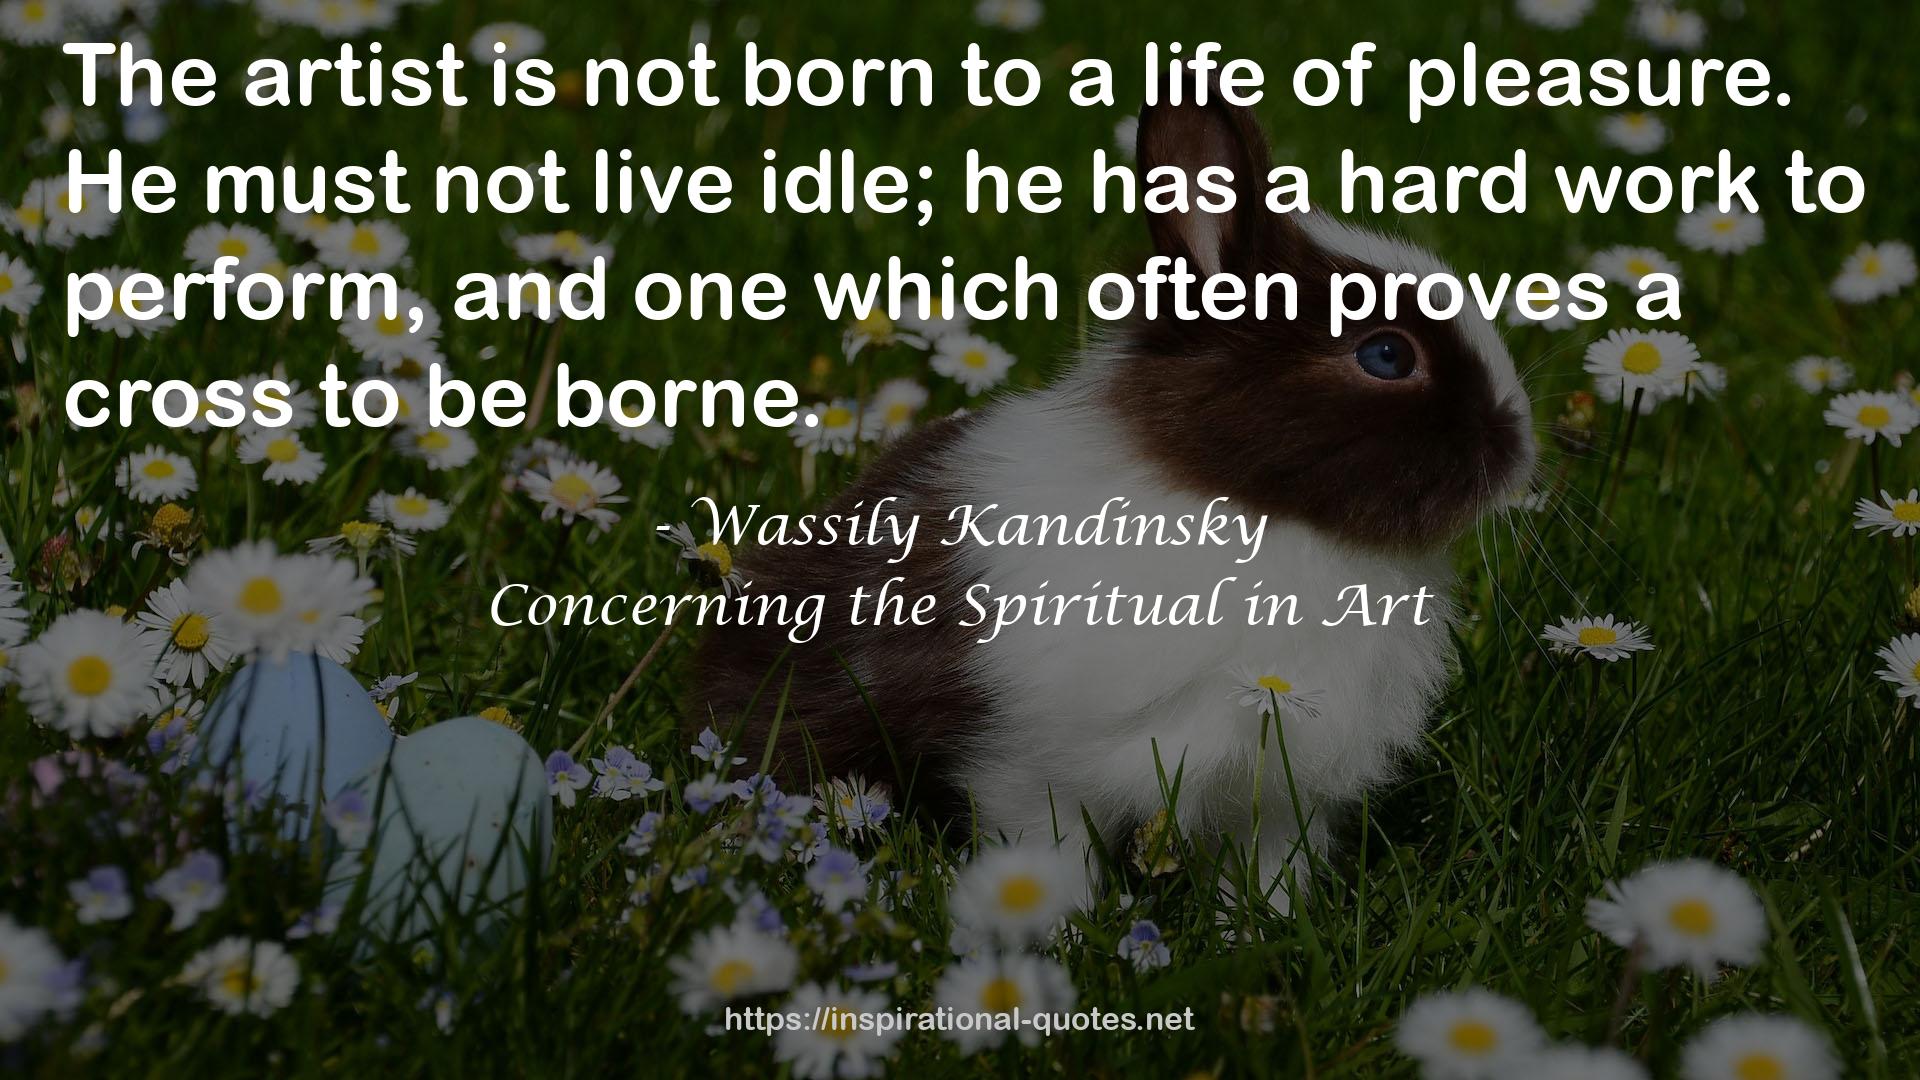 Wassily Kandinsky QUOTES